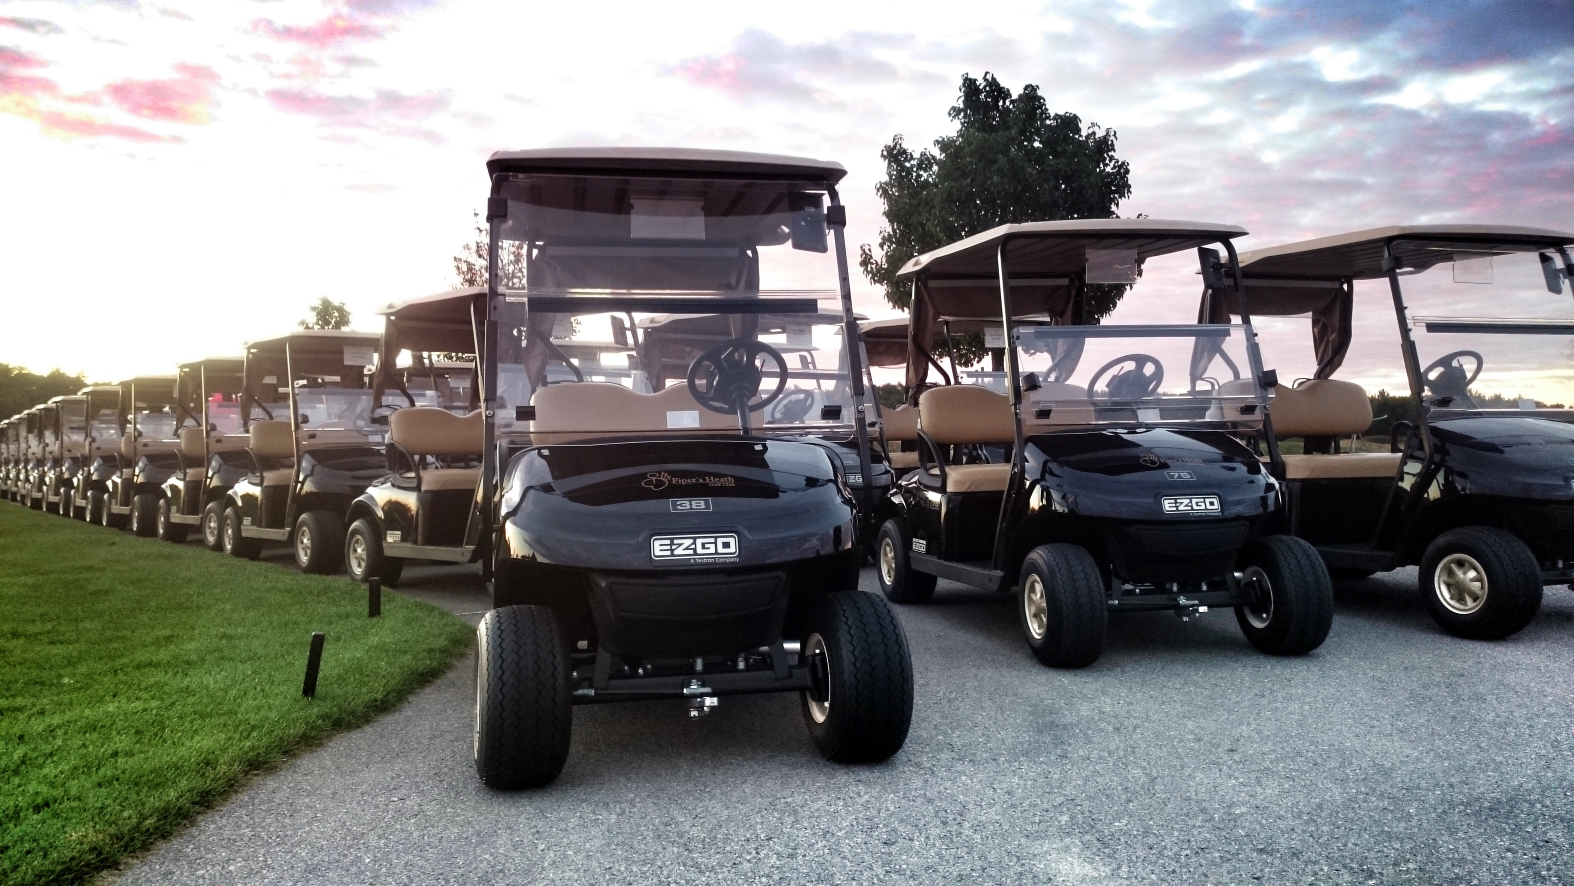 Golf carts staged at Driving Range for a tournament